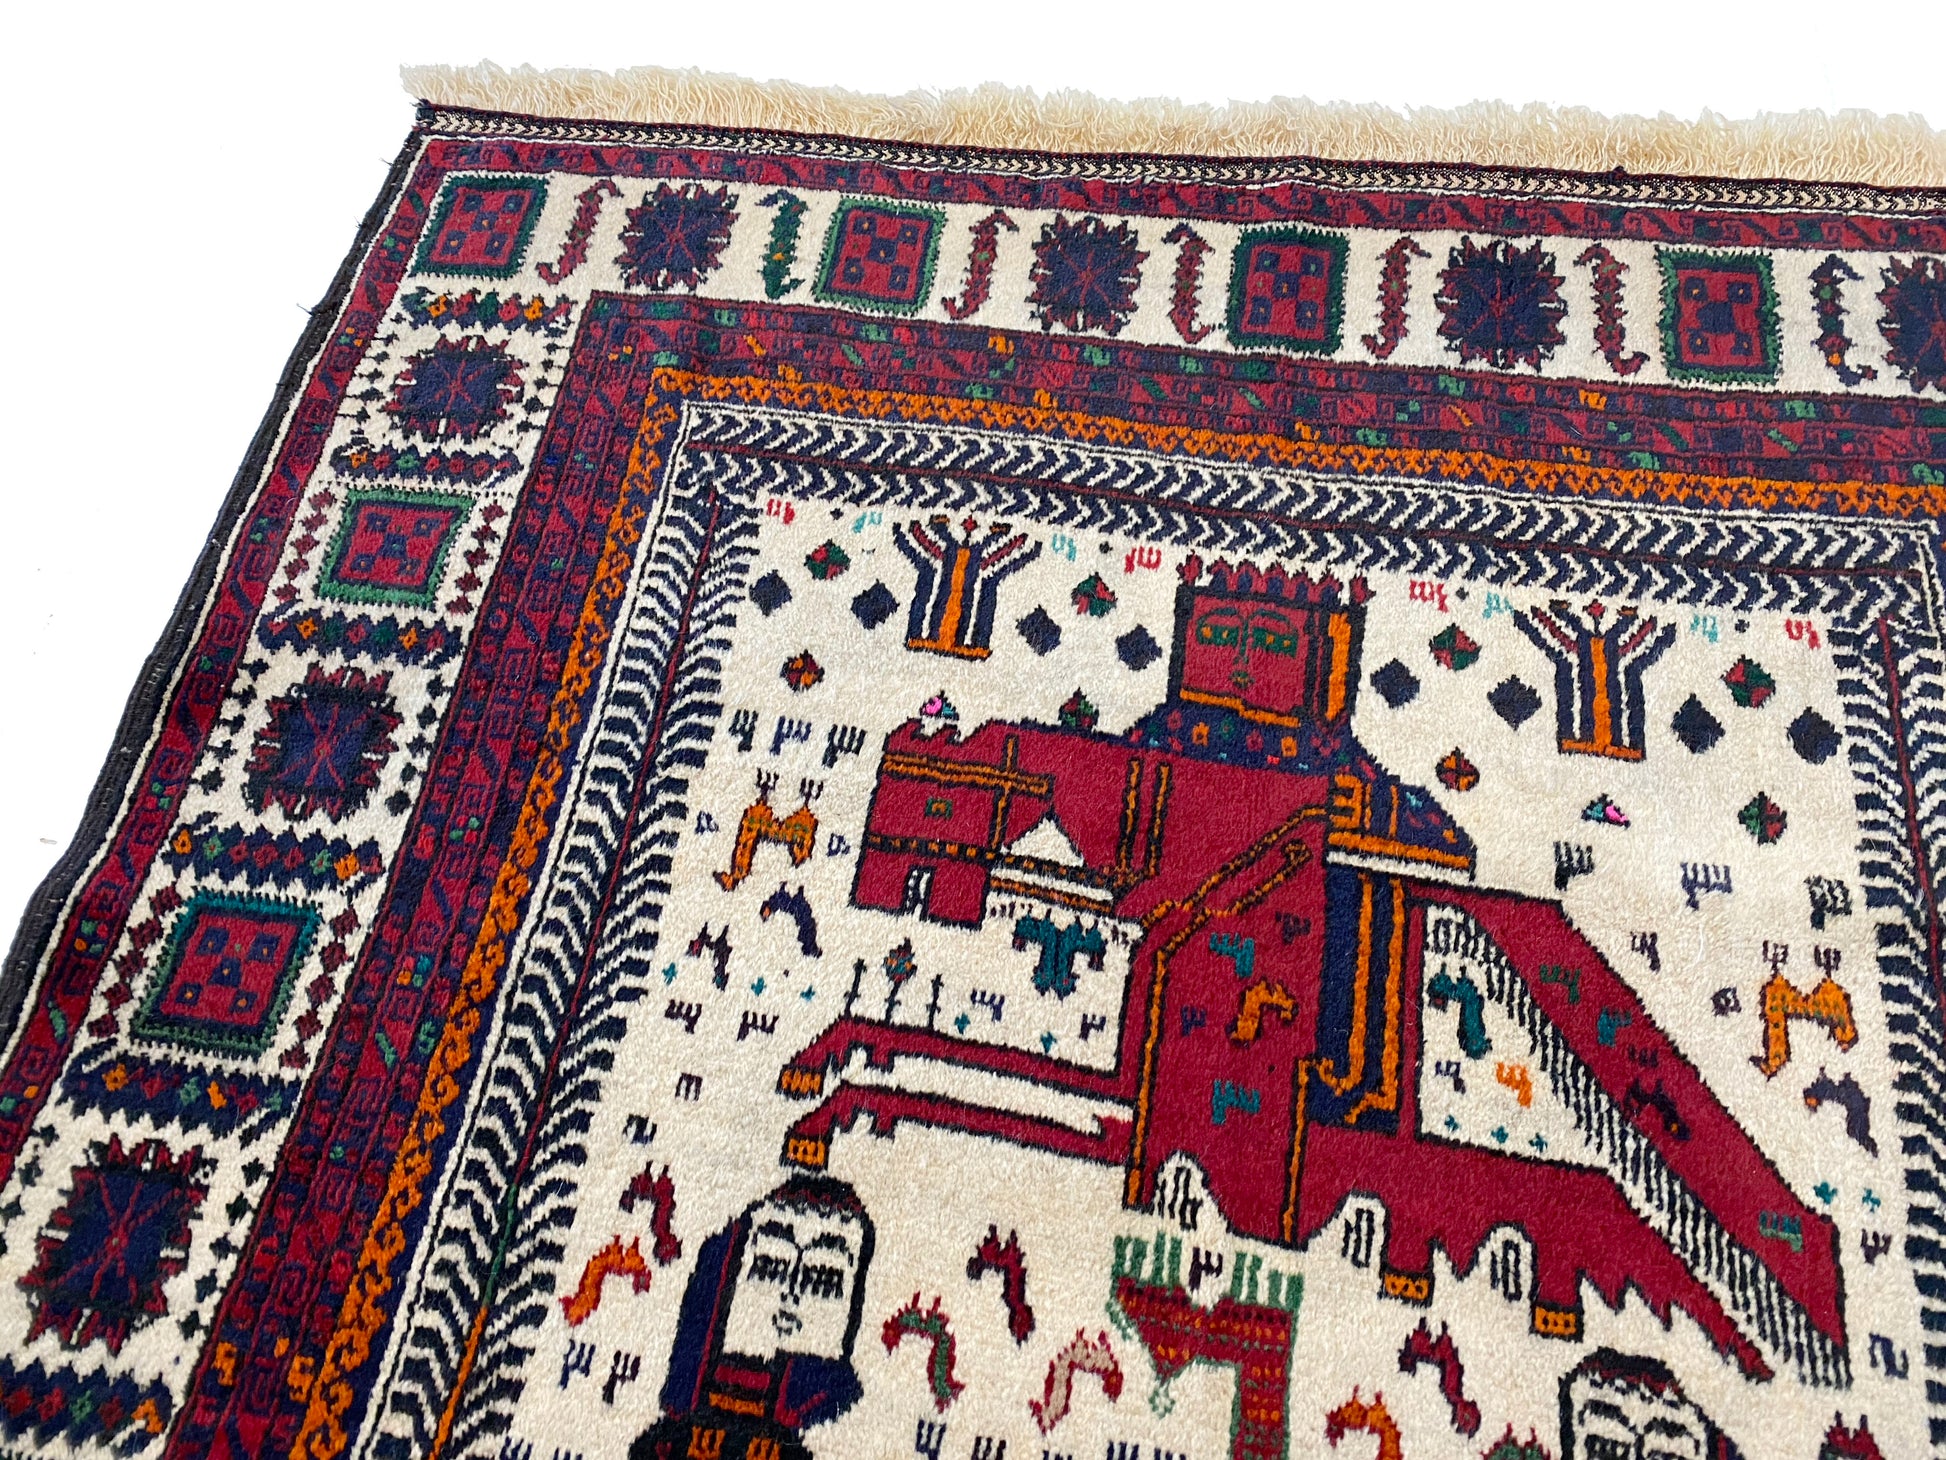 Afghan pictorial rug with cream base and three figures in blue cloaks across the middle, figures with crowns on horses at the top and bottom of rug woven in deep blue and reds